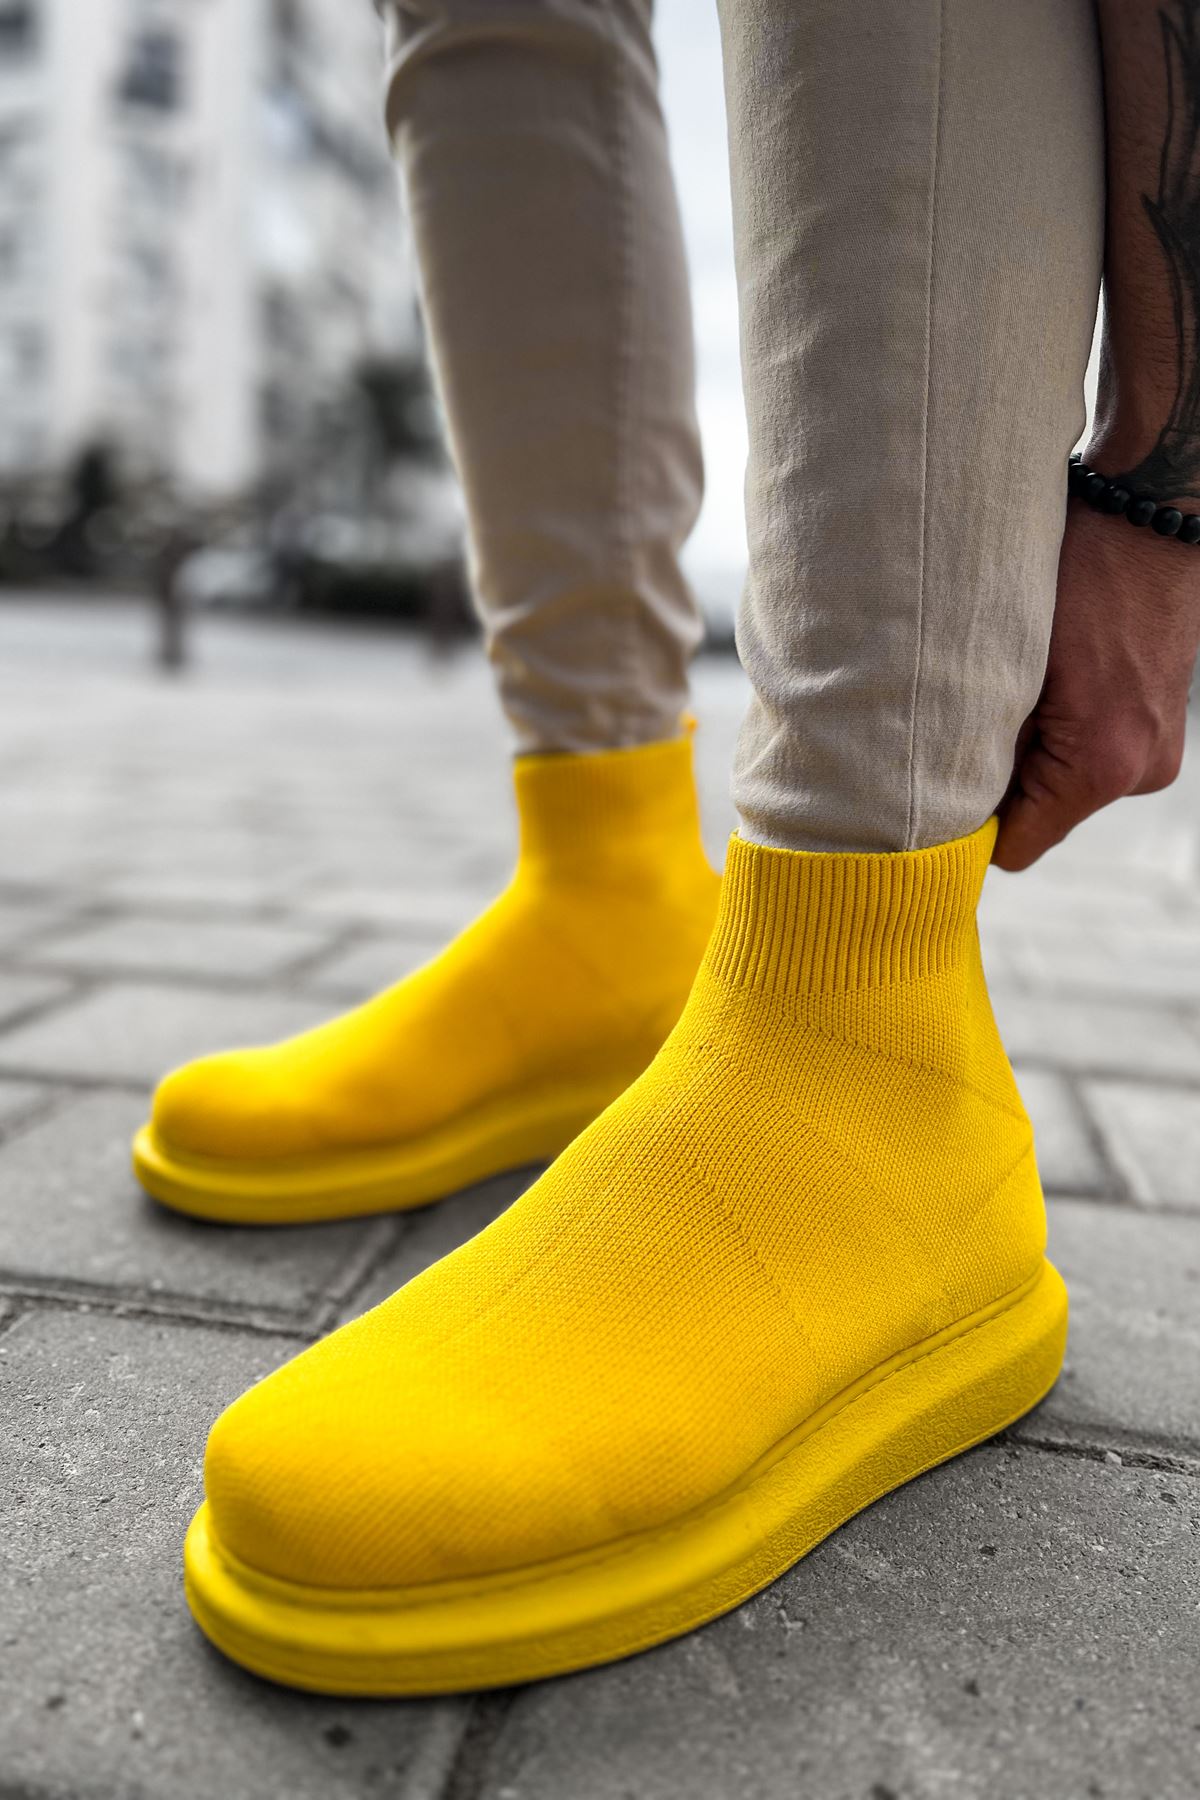 CH207 TRT Maglieria-T Men's Shoes YELLOW Boots - STREETMODE™